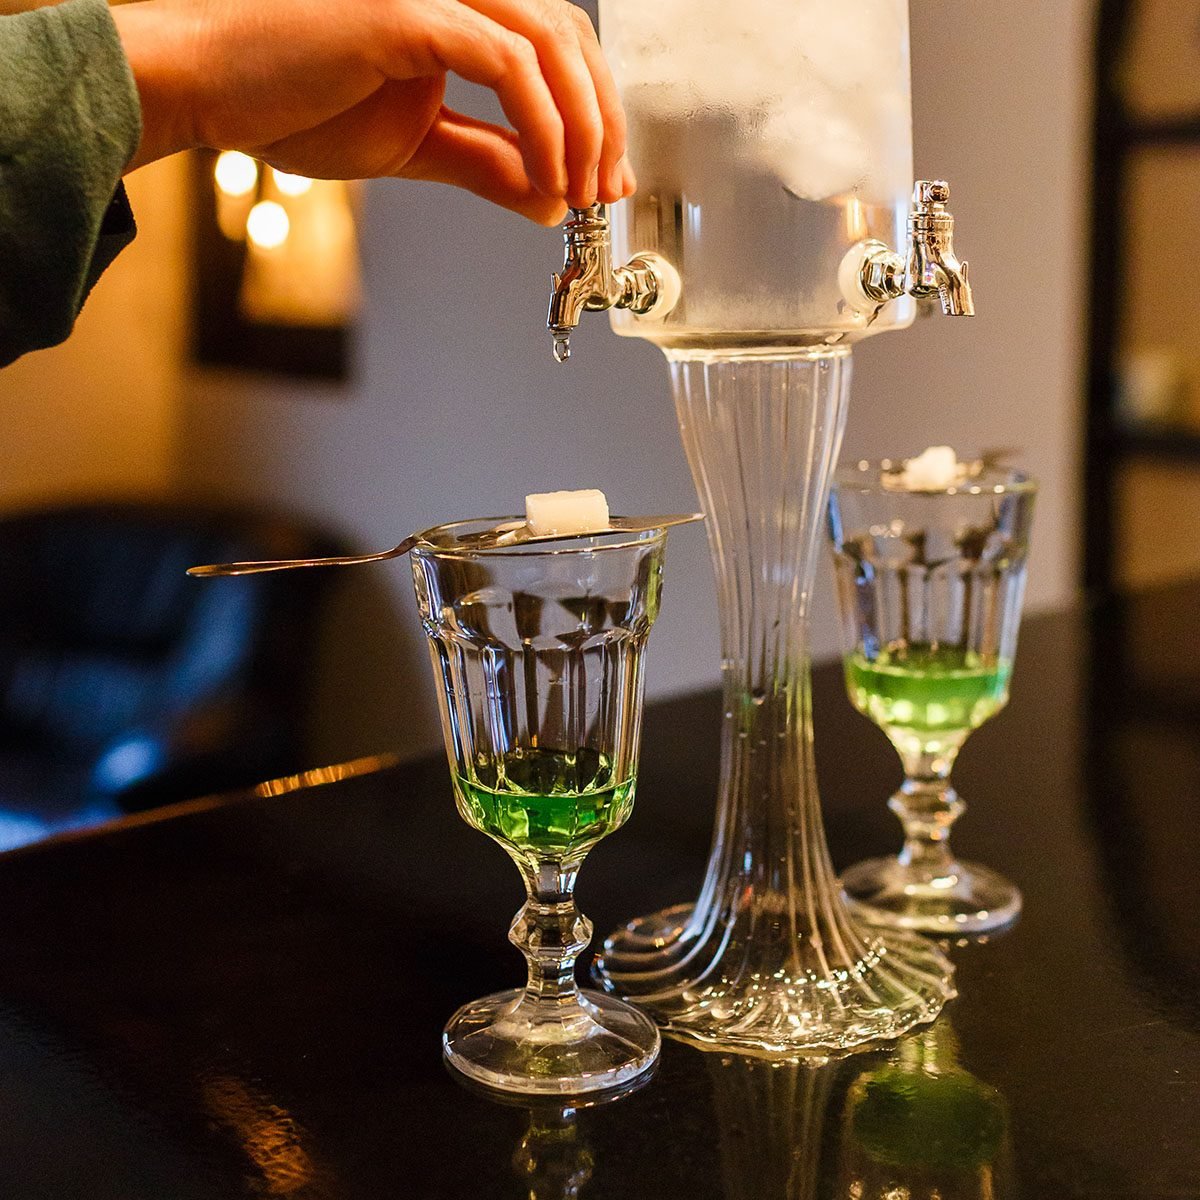 absinthe-water-drip-feature-1200x1200-GettyImages-1219995575.jpg?w=1200